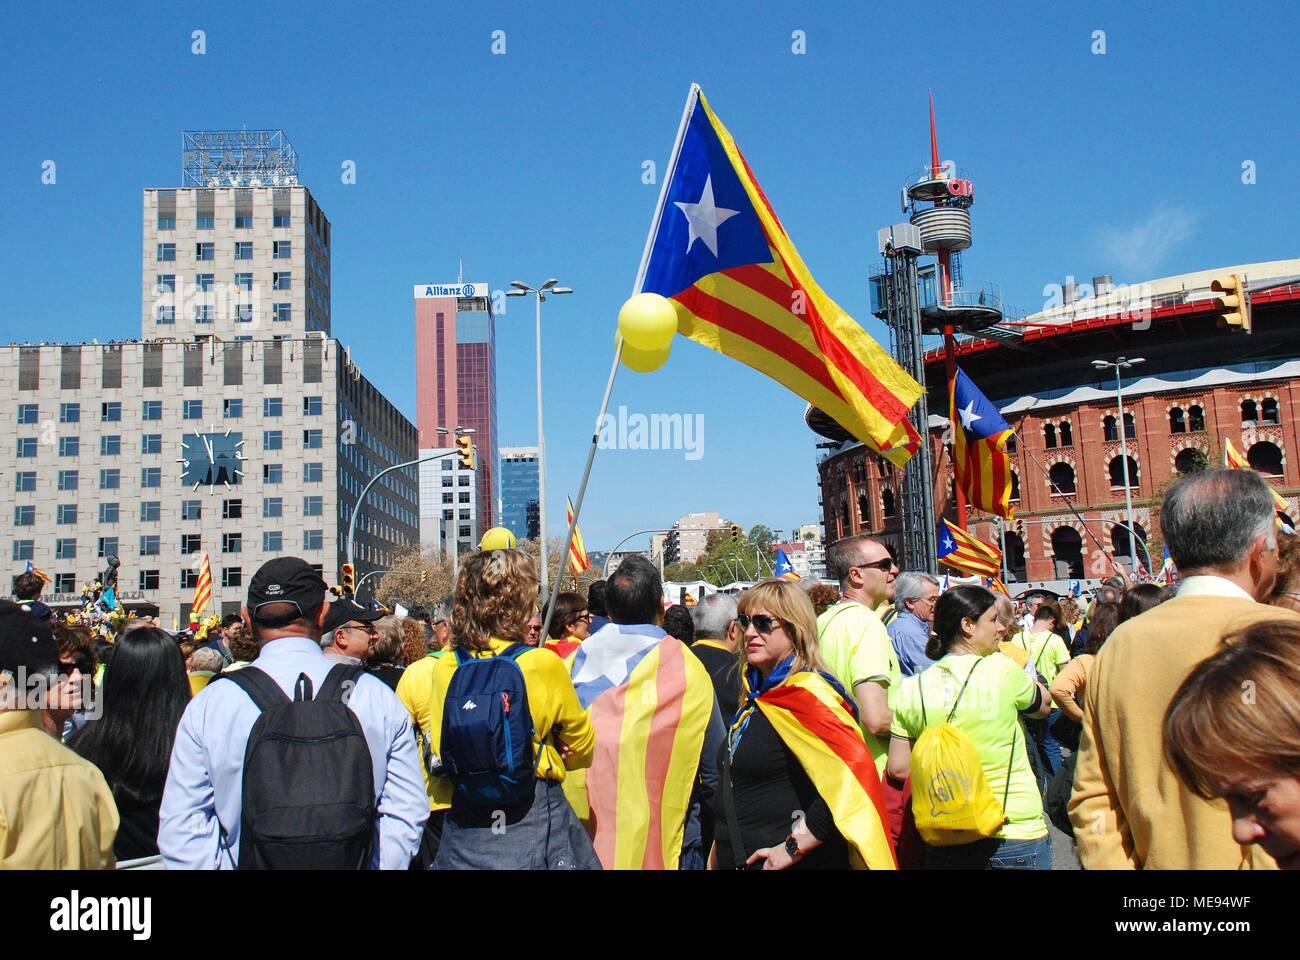 Catalans take part in the Llibertat Presos Politics march in support of jailed politicians at Placa Espanya in Barcelona, Spain on April 15, 2018. Stock Photo